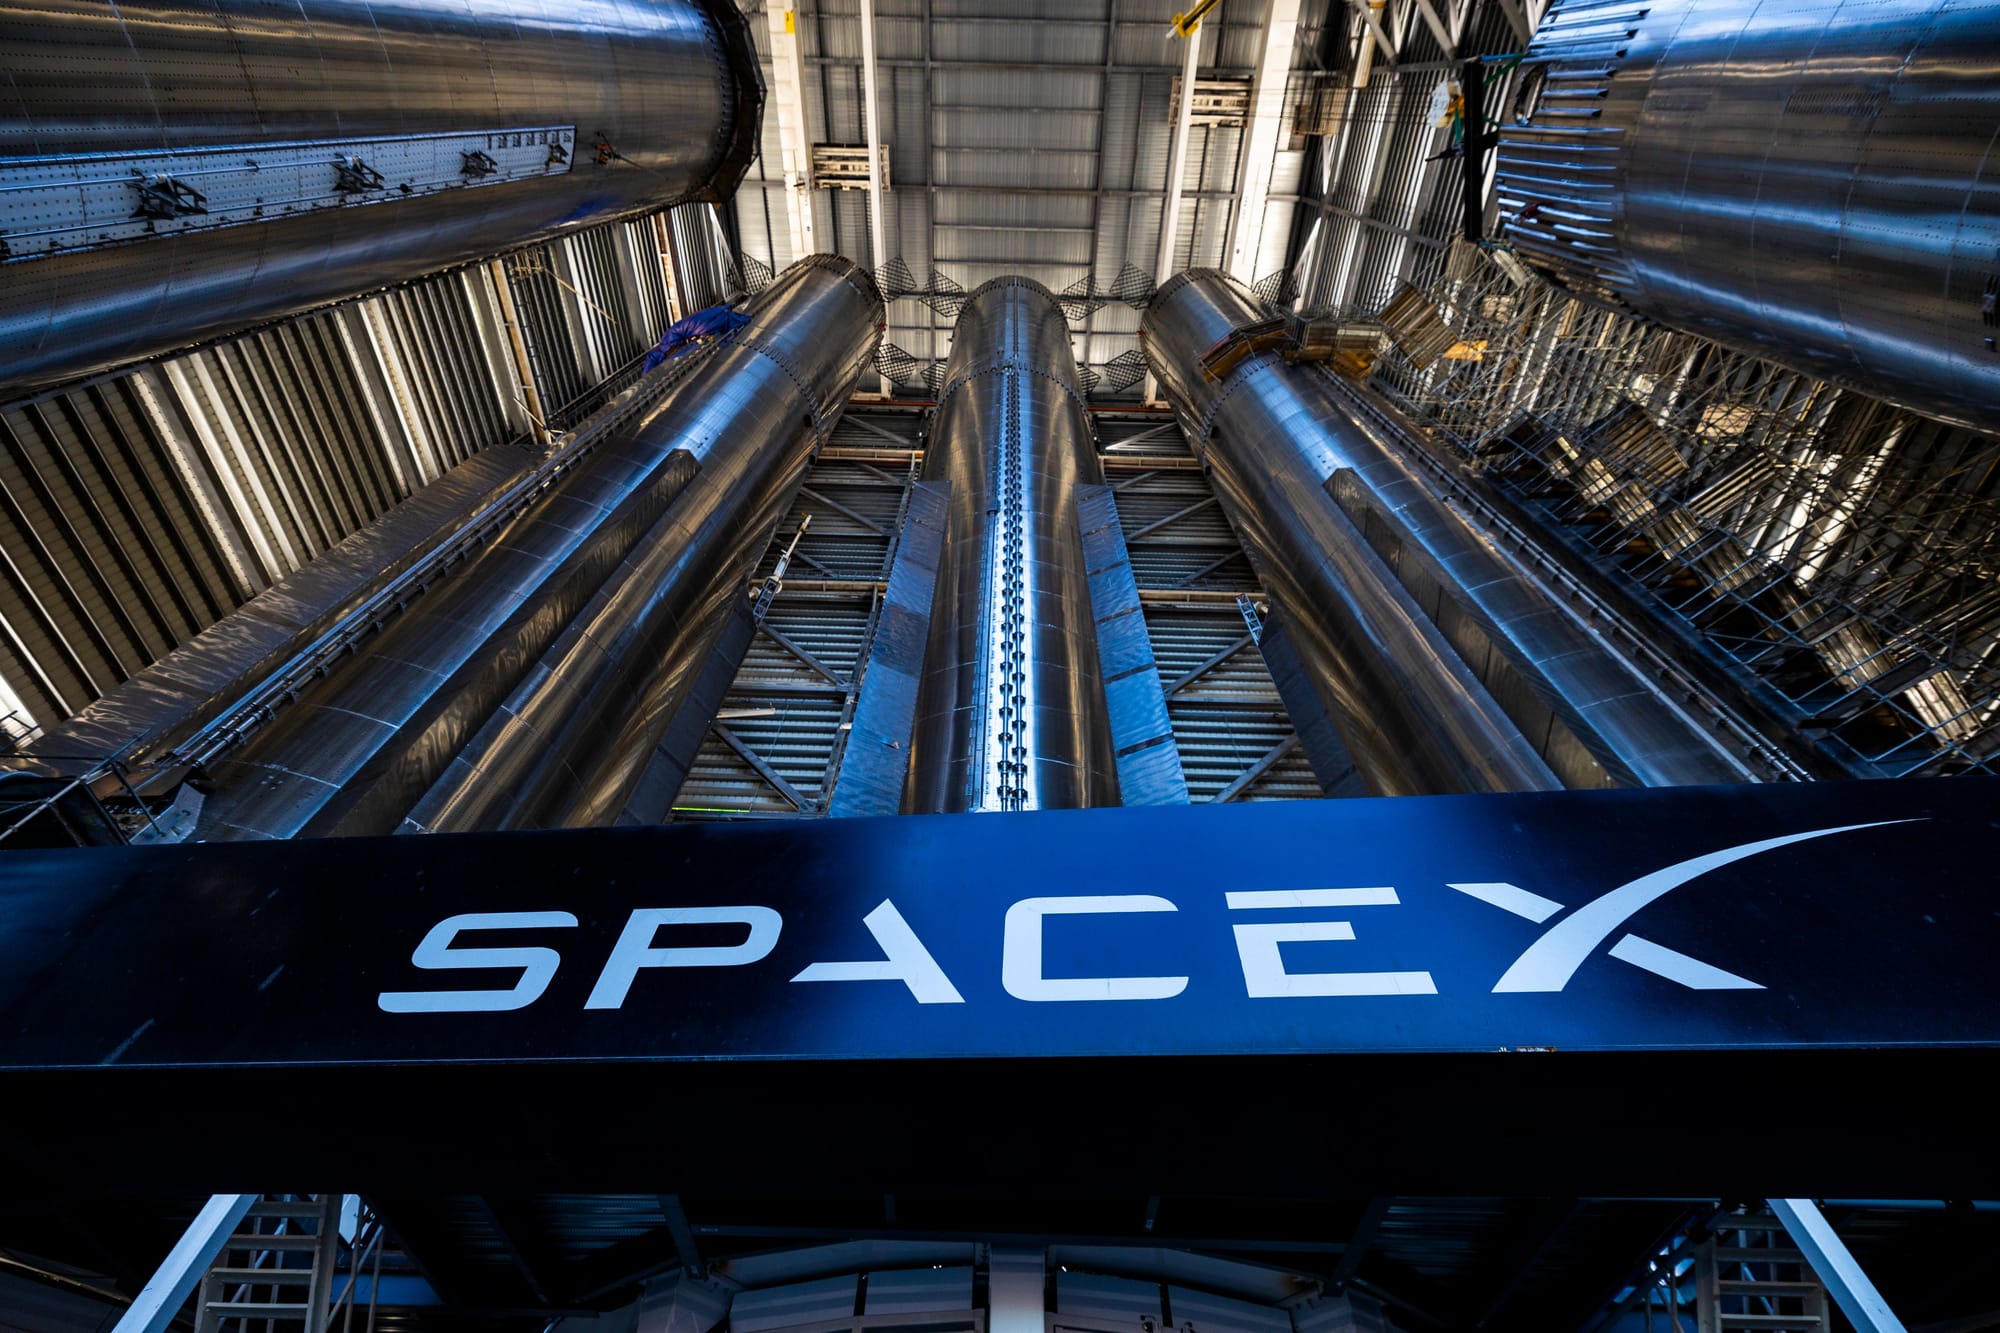 A view of three boosters inside one of the 'Megabay's' at Starbase. ©SpaceX